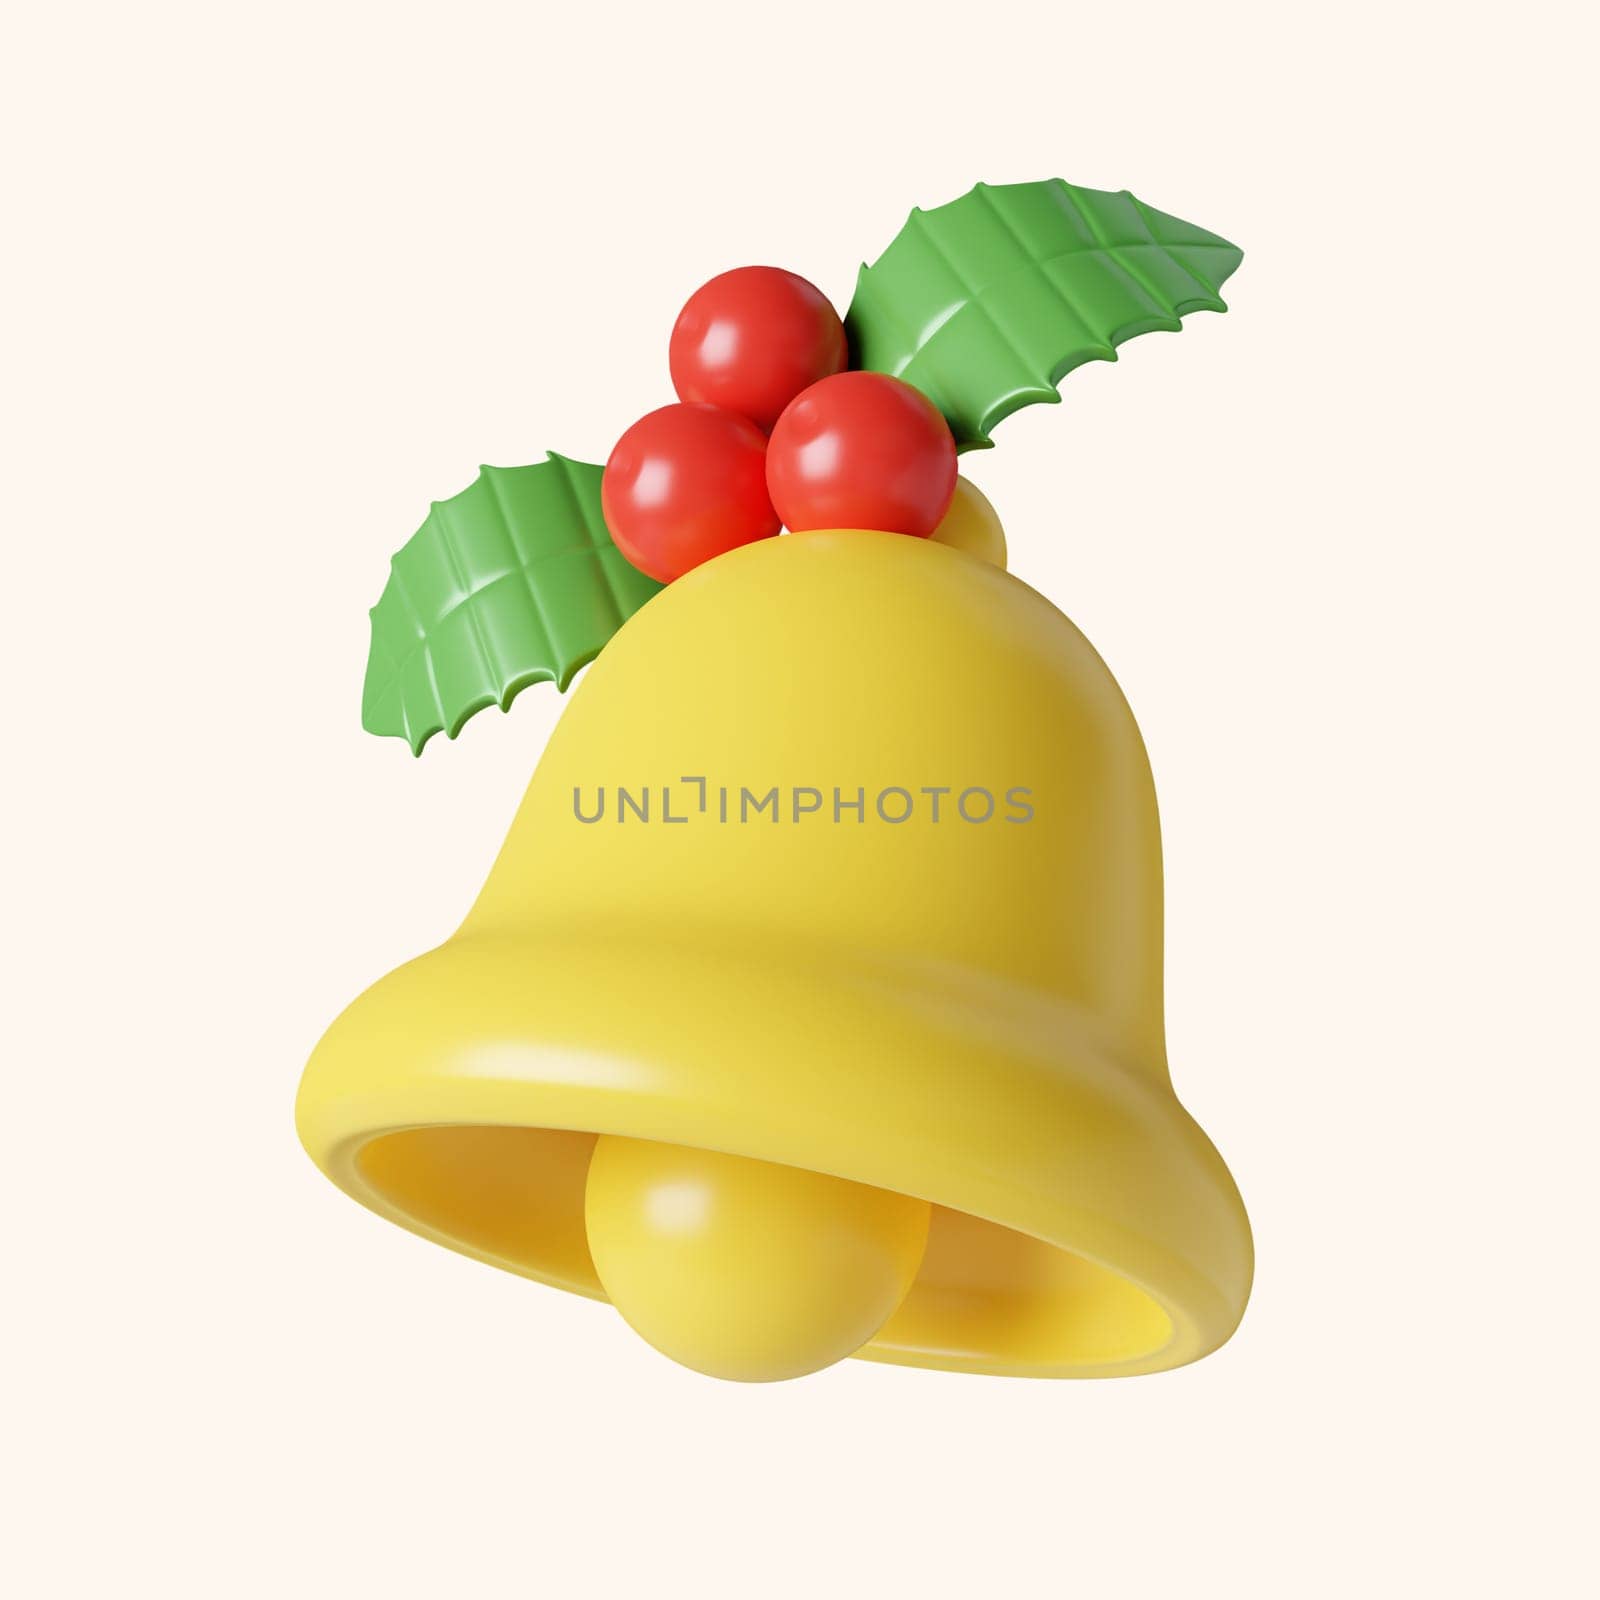 3d Christmas bell icon. minimal decorative festive conical shape tree. New Year's holiday decor. 3d design element In cartoon style. Icon isolated on white background. 3D illustration by meepiangraphic